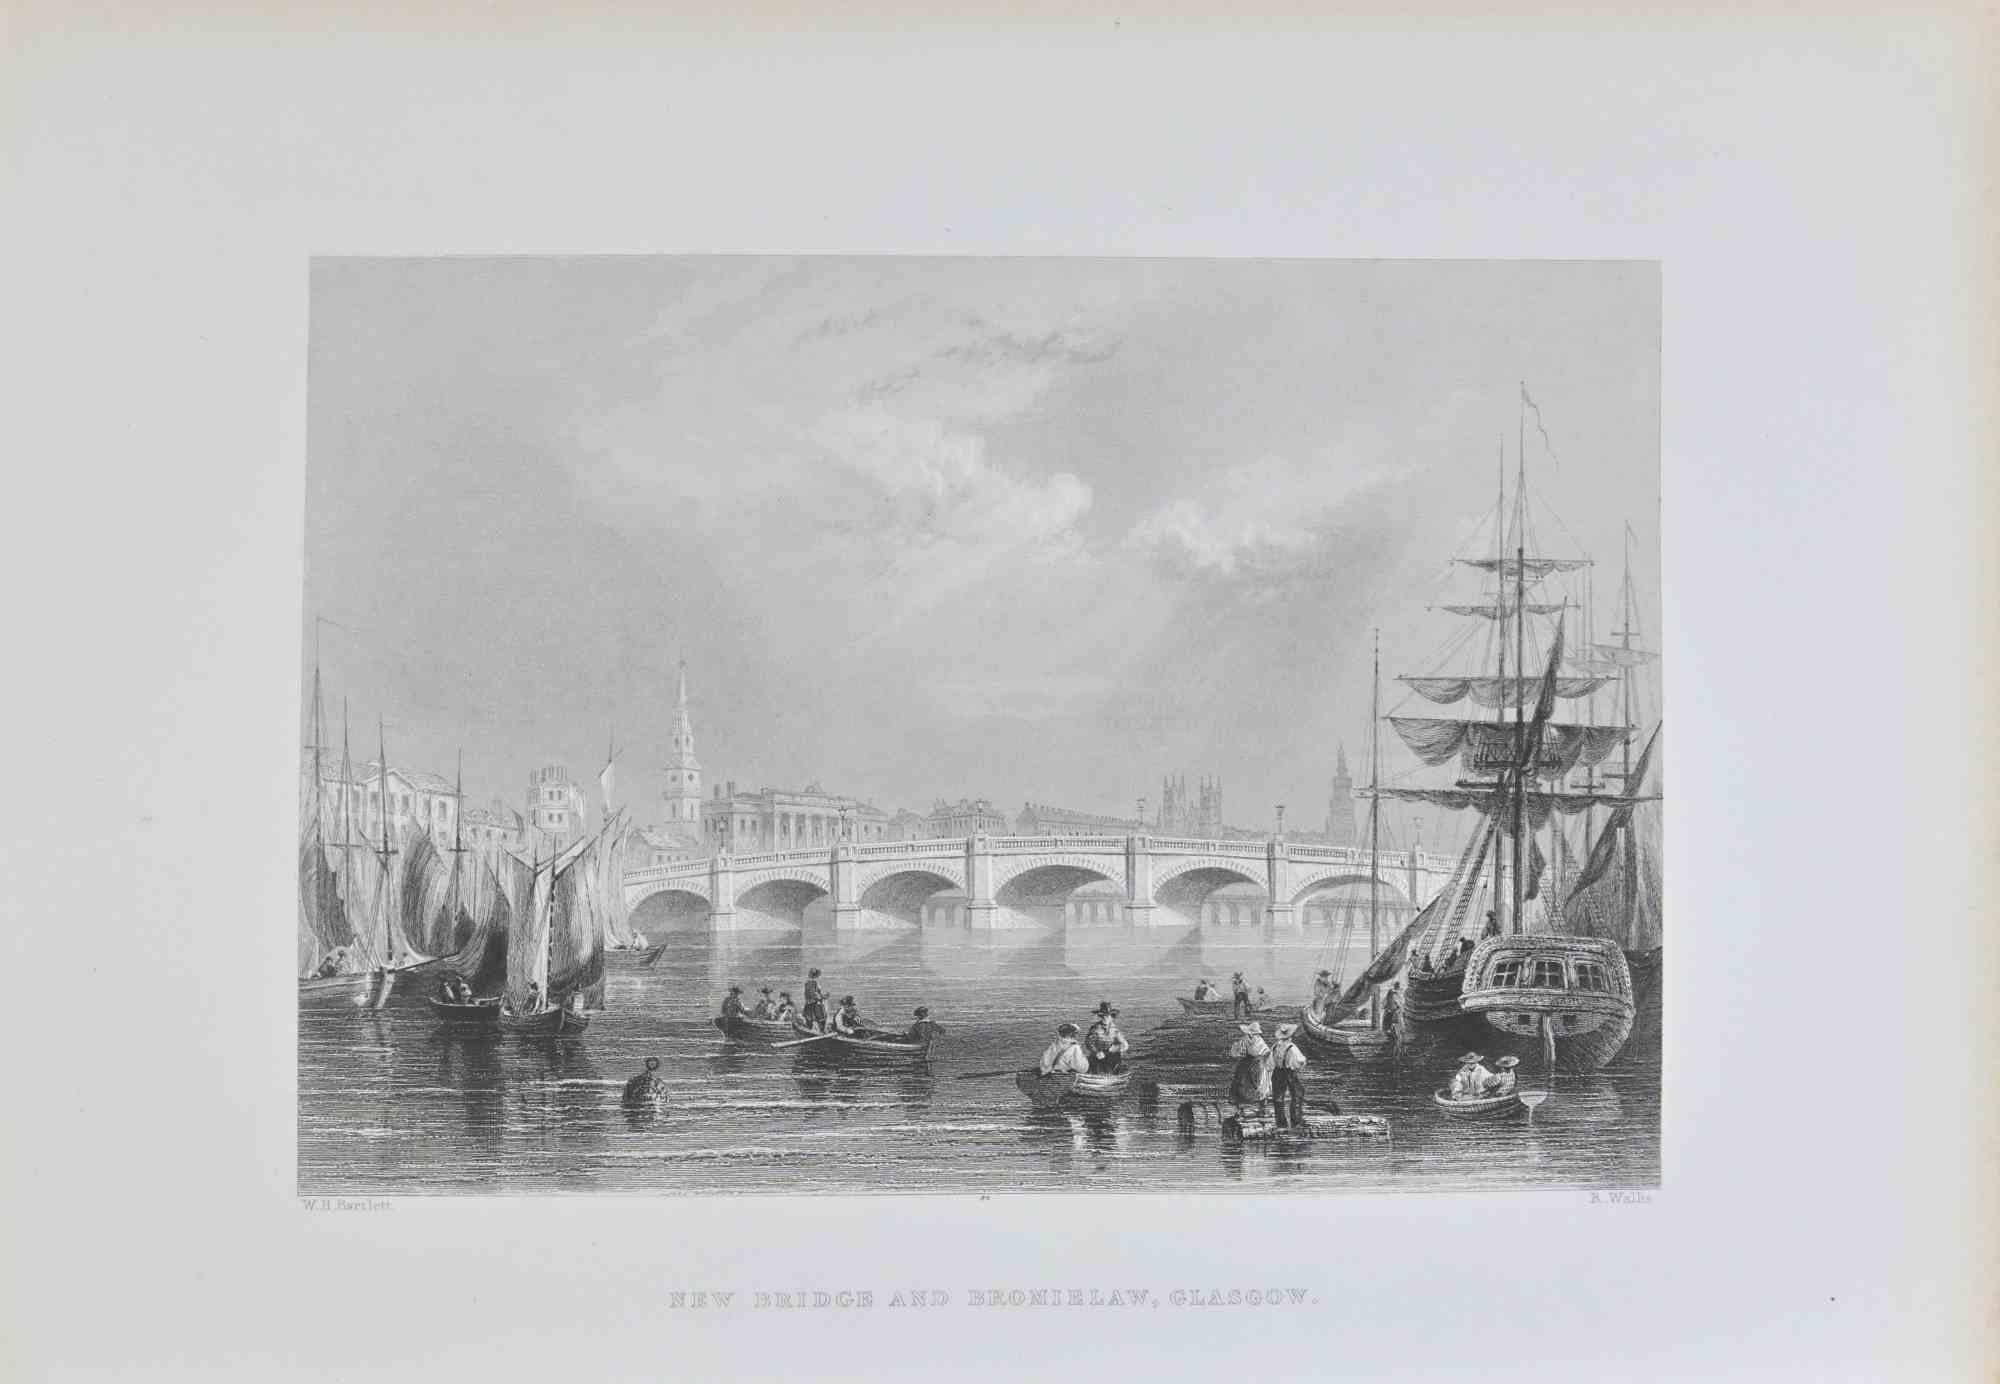 New Bridge, Glasgow is an etching realized in 1845 by W. H. Bartlett.

Signed on the plate. 

Titled on the lower center.

Good conditions with slight foxing.

The artwork is beautifully realized in a well-balanced composition through short, deft